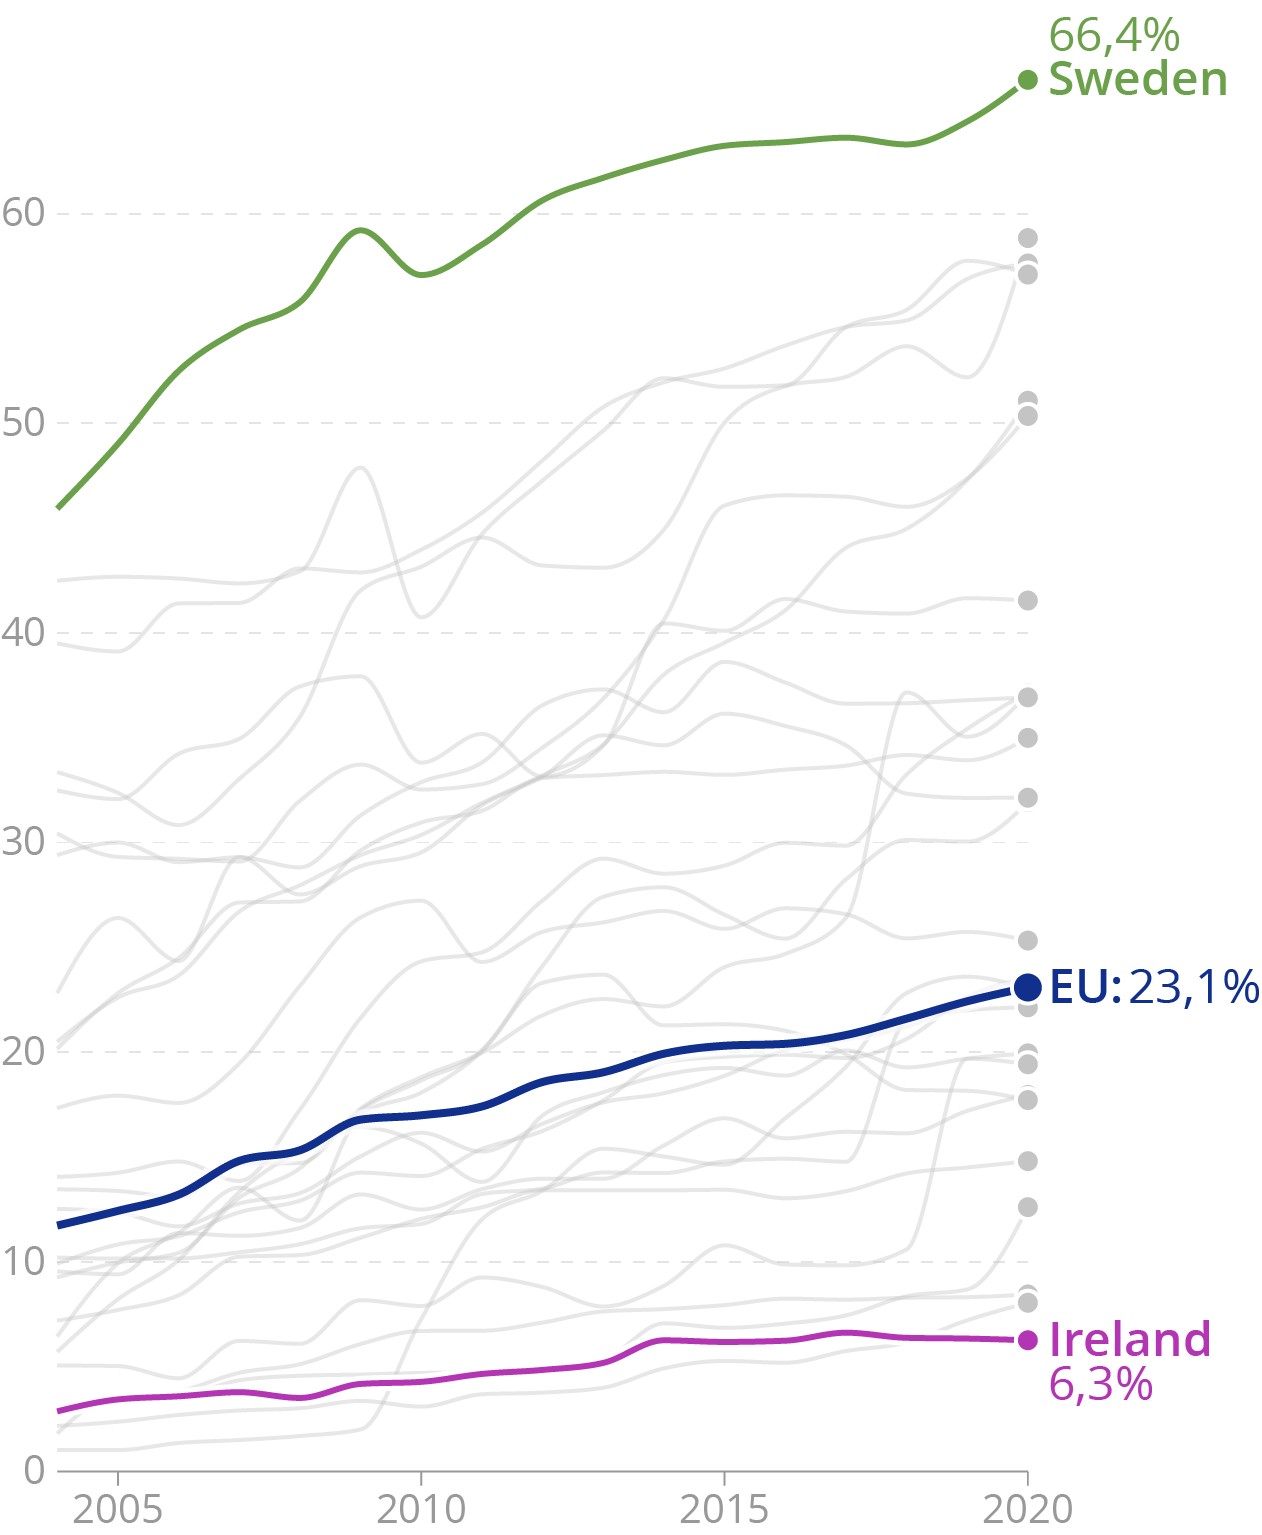 The same line chart as above, but with the names of the lines directly next to the lines, instead of with a separate colour legend